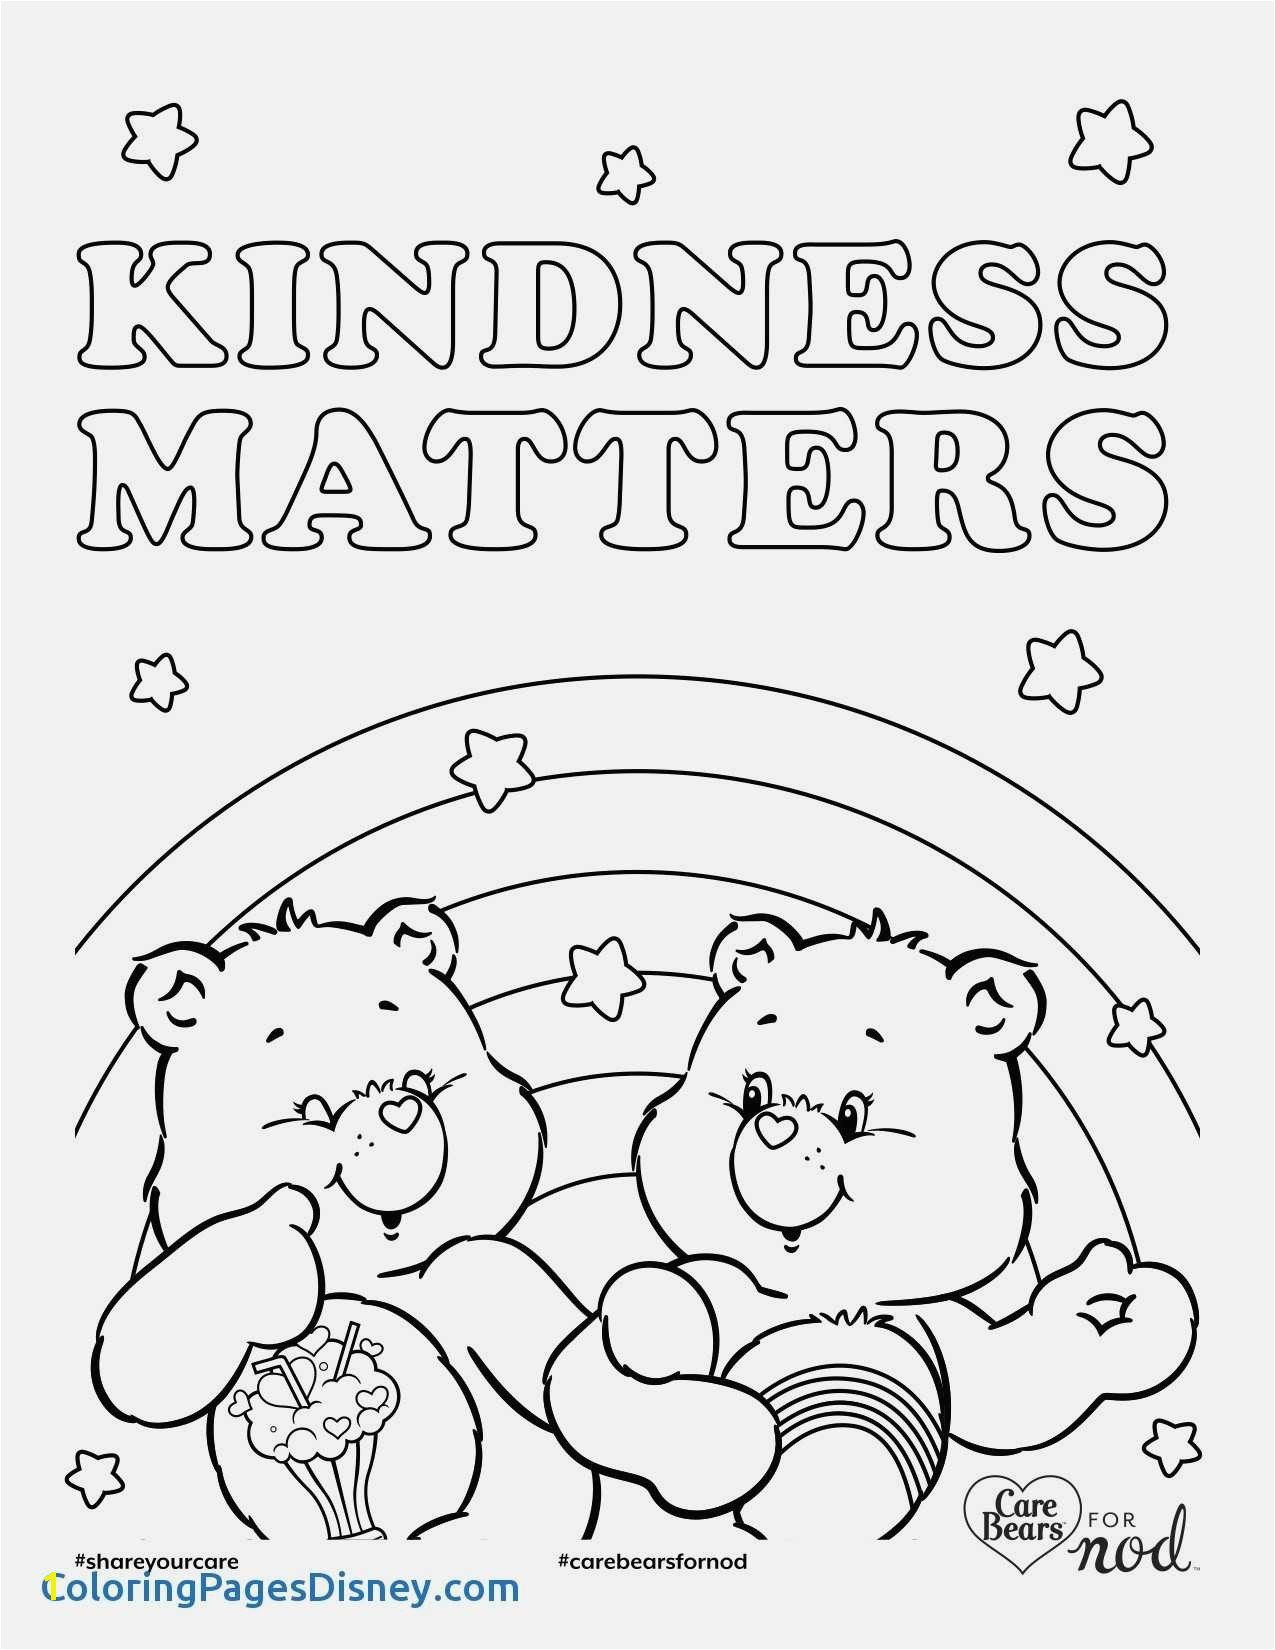 States Of Matter Coloring Pages 12 New Print Out Coloring Pages